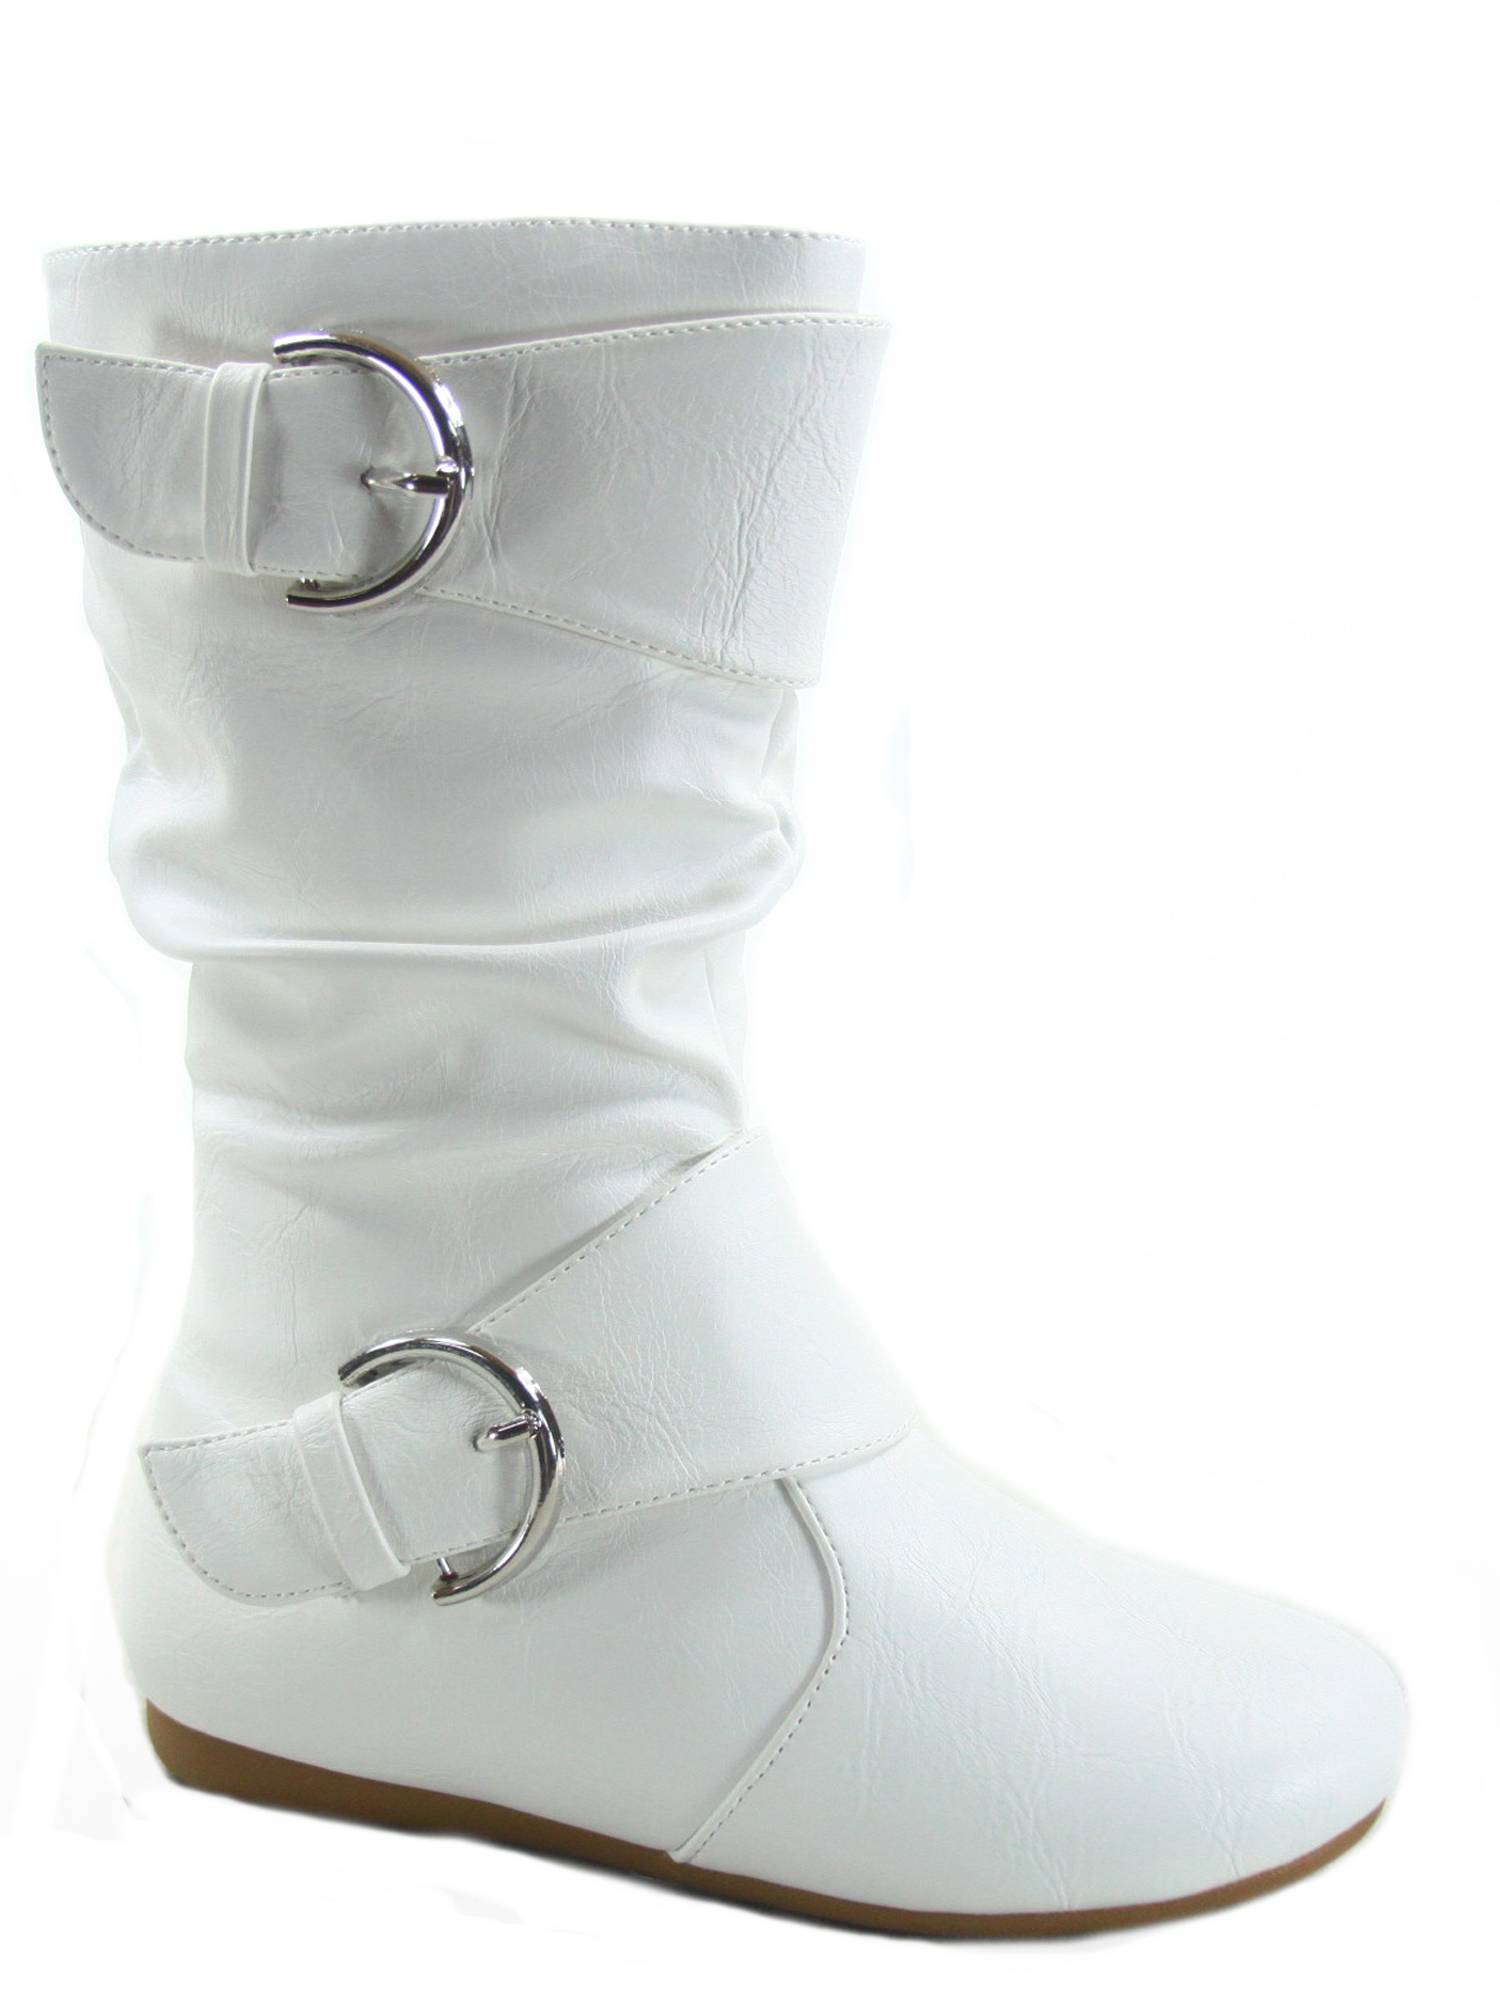 Klein-80k Girls Kid's Causal Round Toe Flat Heel Buckles Zipper Slouchy Mid Calf Boots Shoes ( White, 9 ) - image 1 of 2